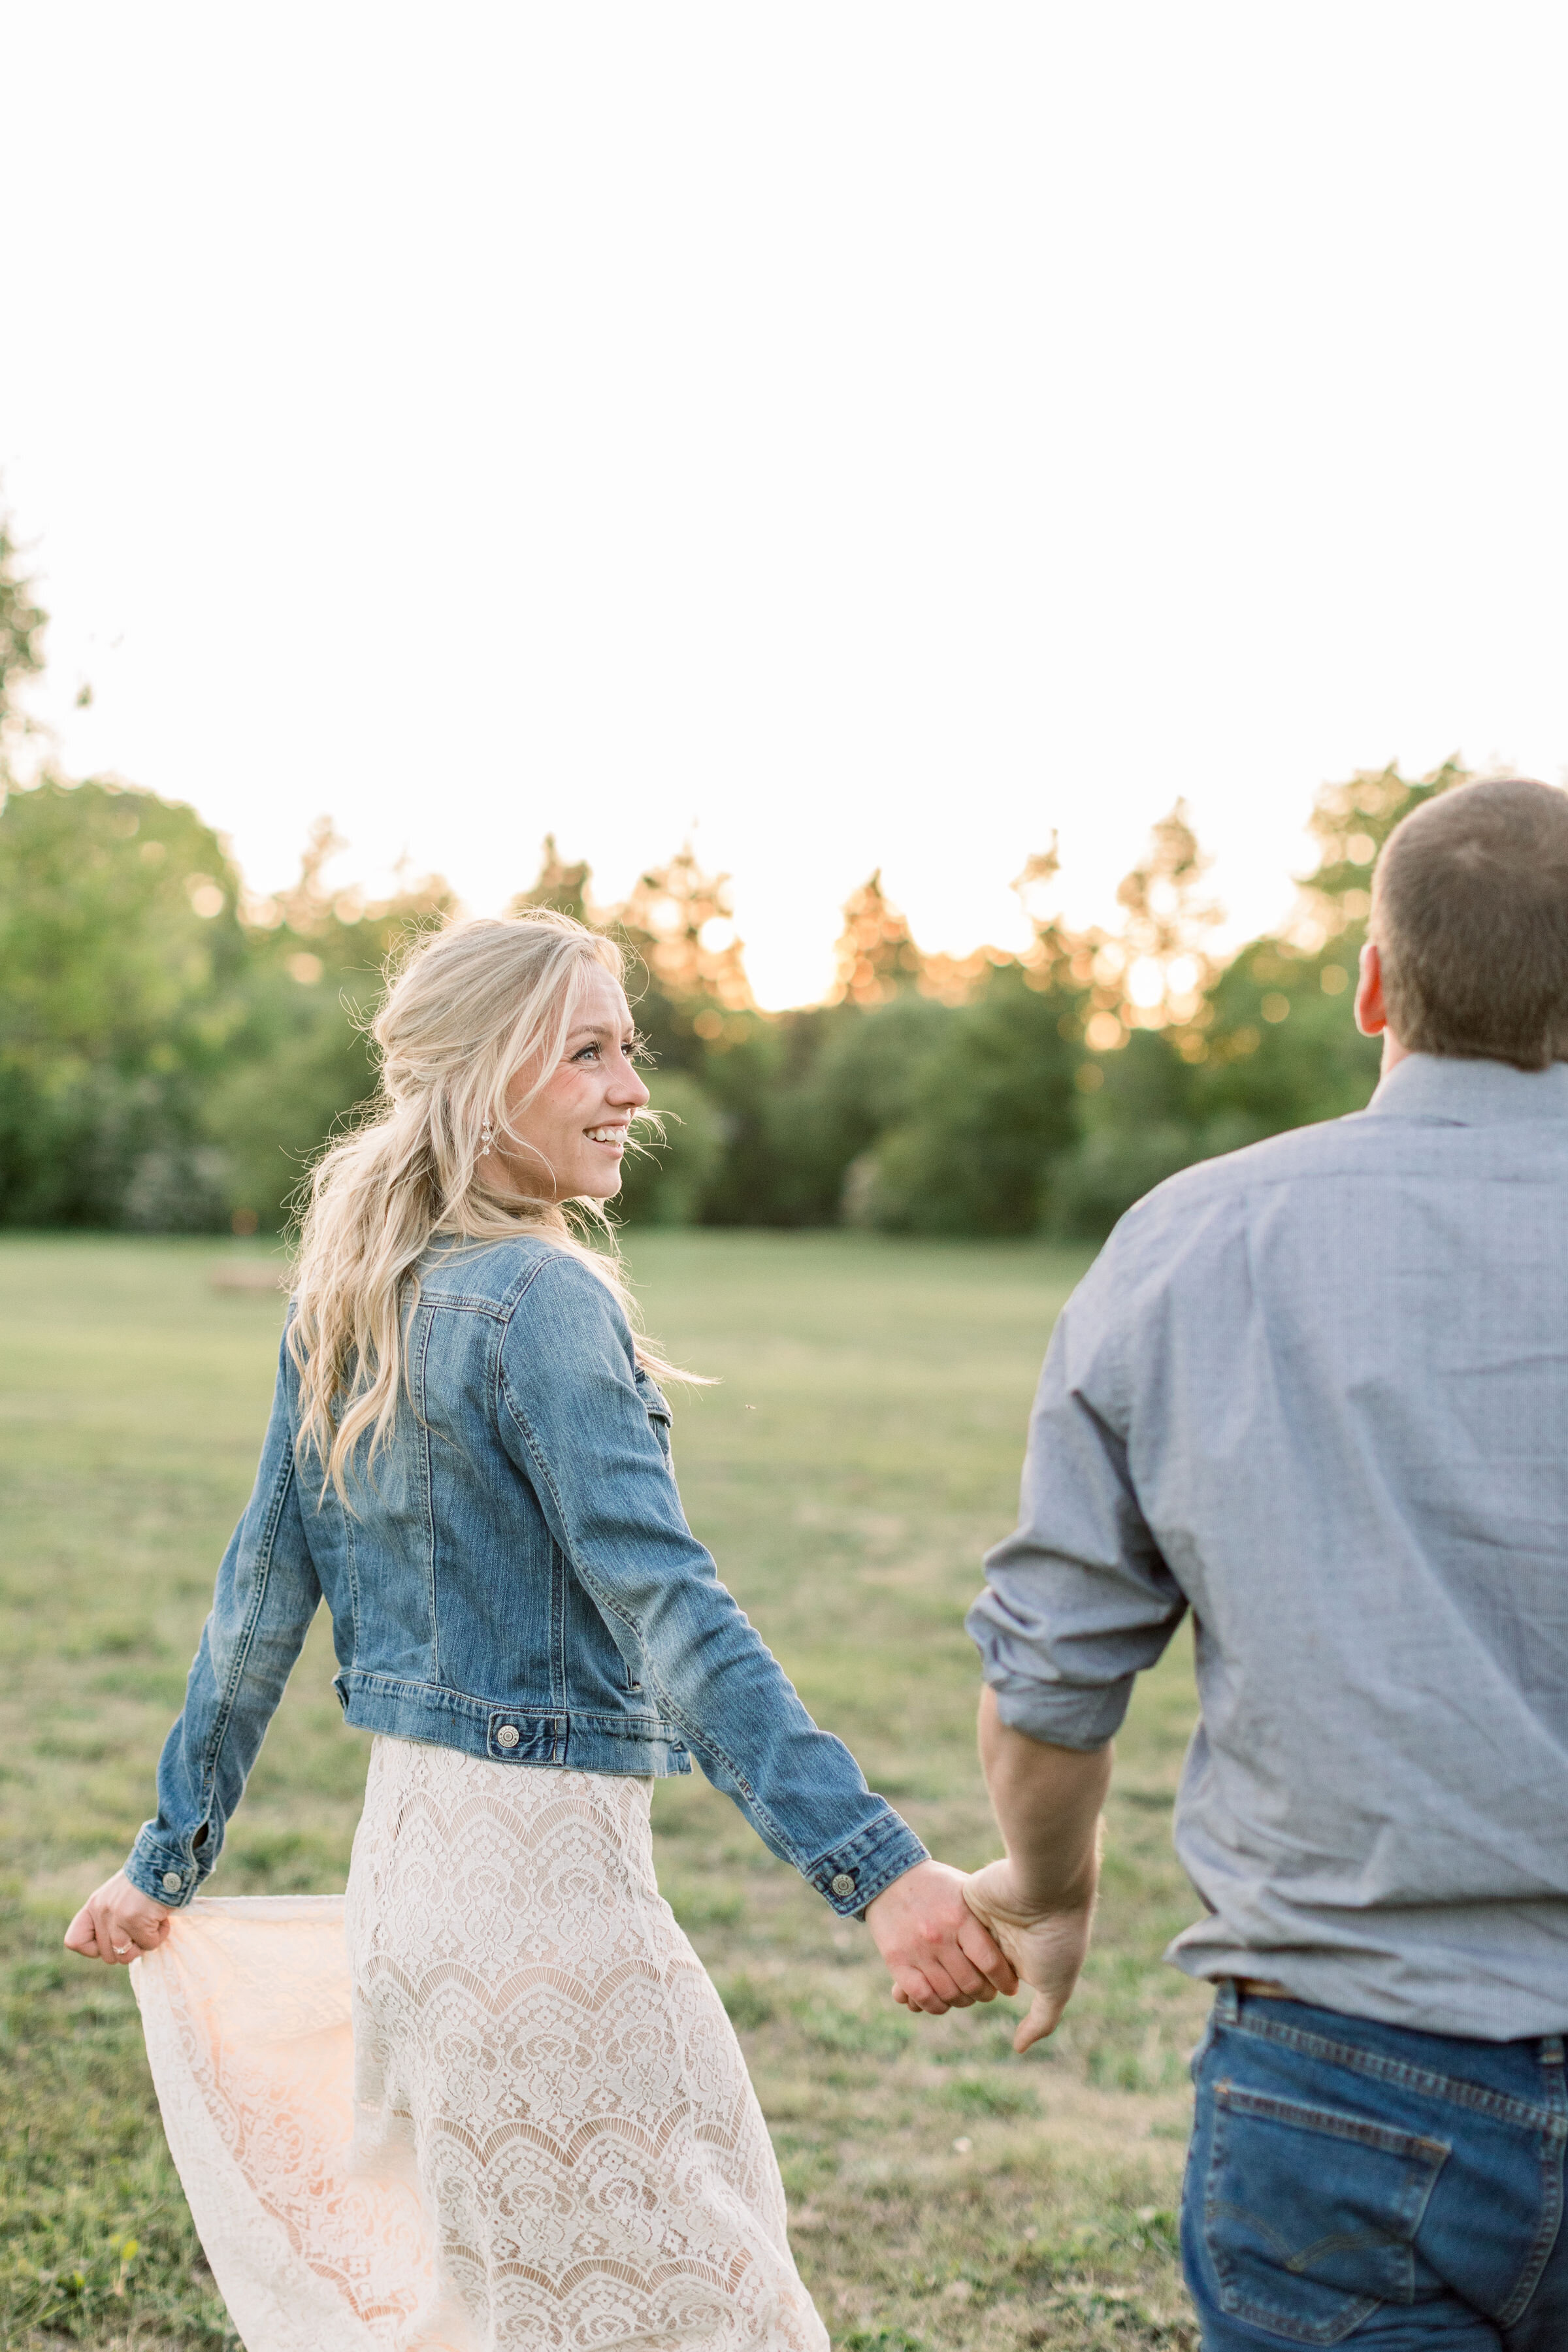  Ottawa, Canada engagement photographer, Chelsea Mason Photography captures this couple running through a grassy field and laughing during their engagement session. engaged couple holding hands and laughing together southern style engagement outfit #